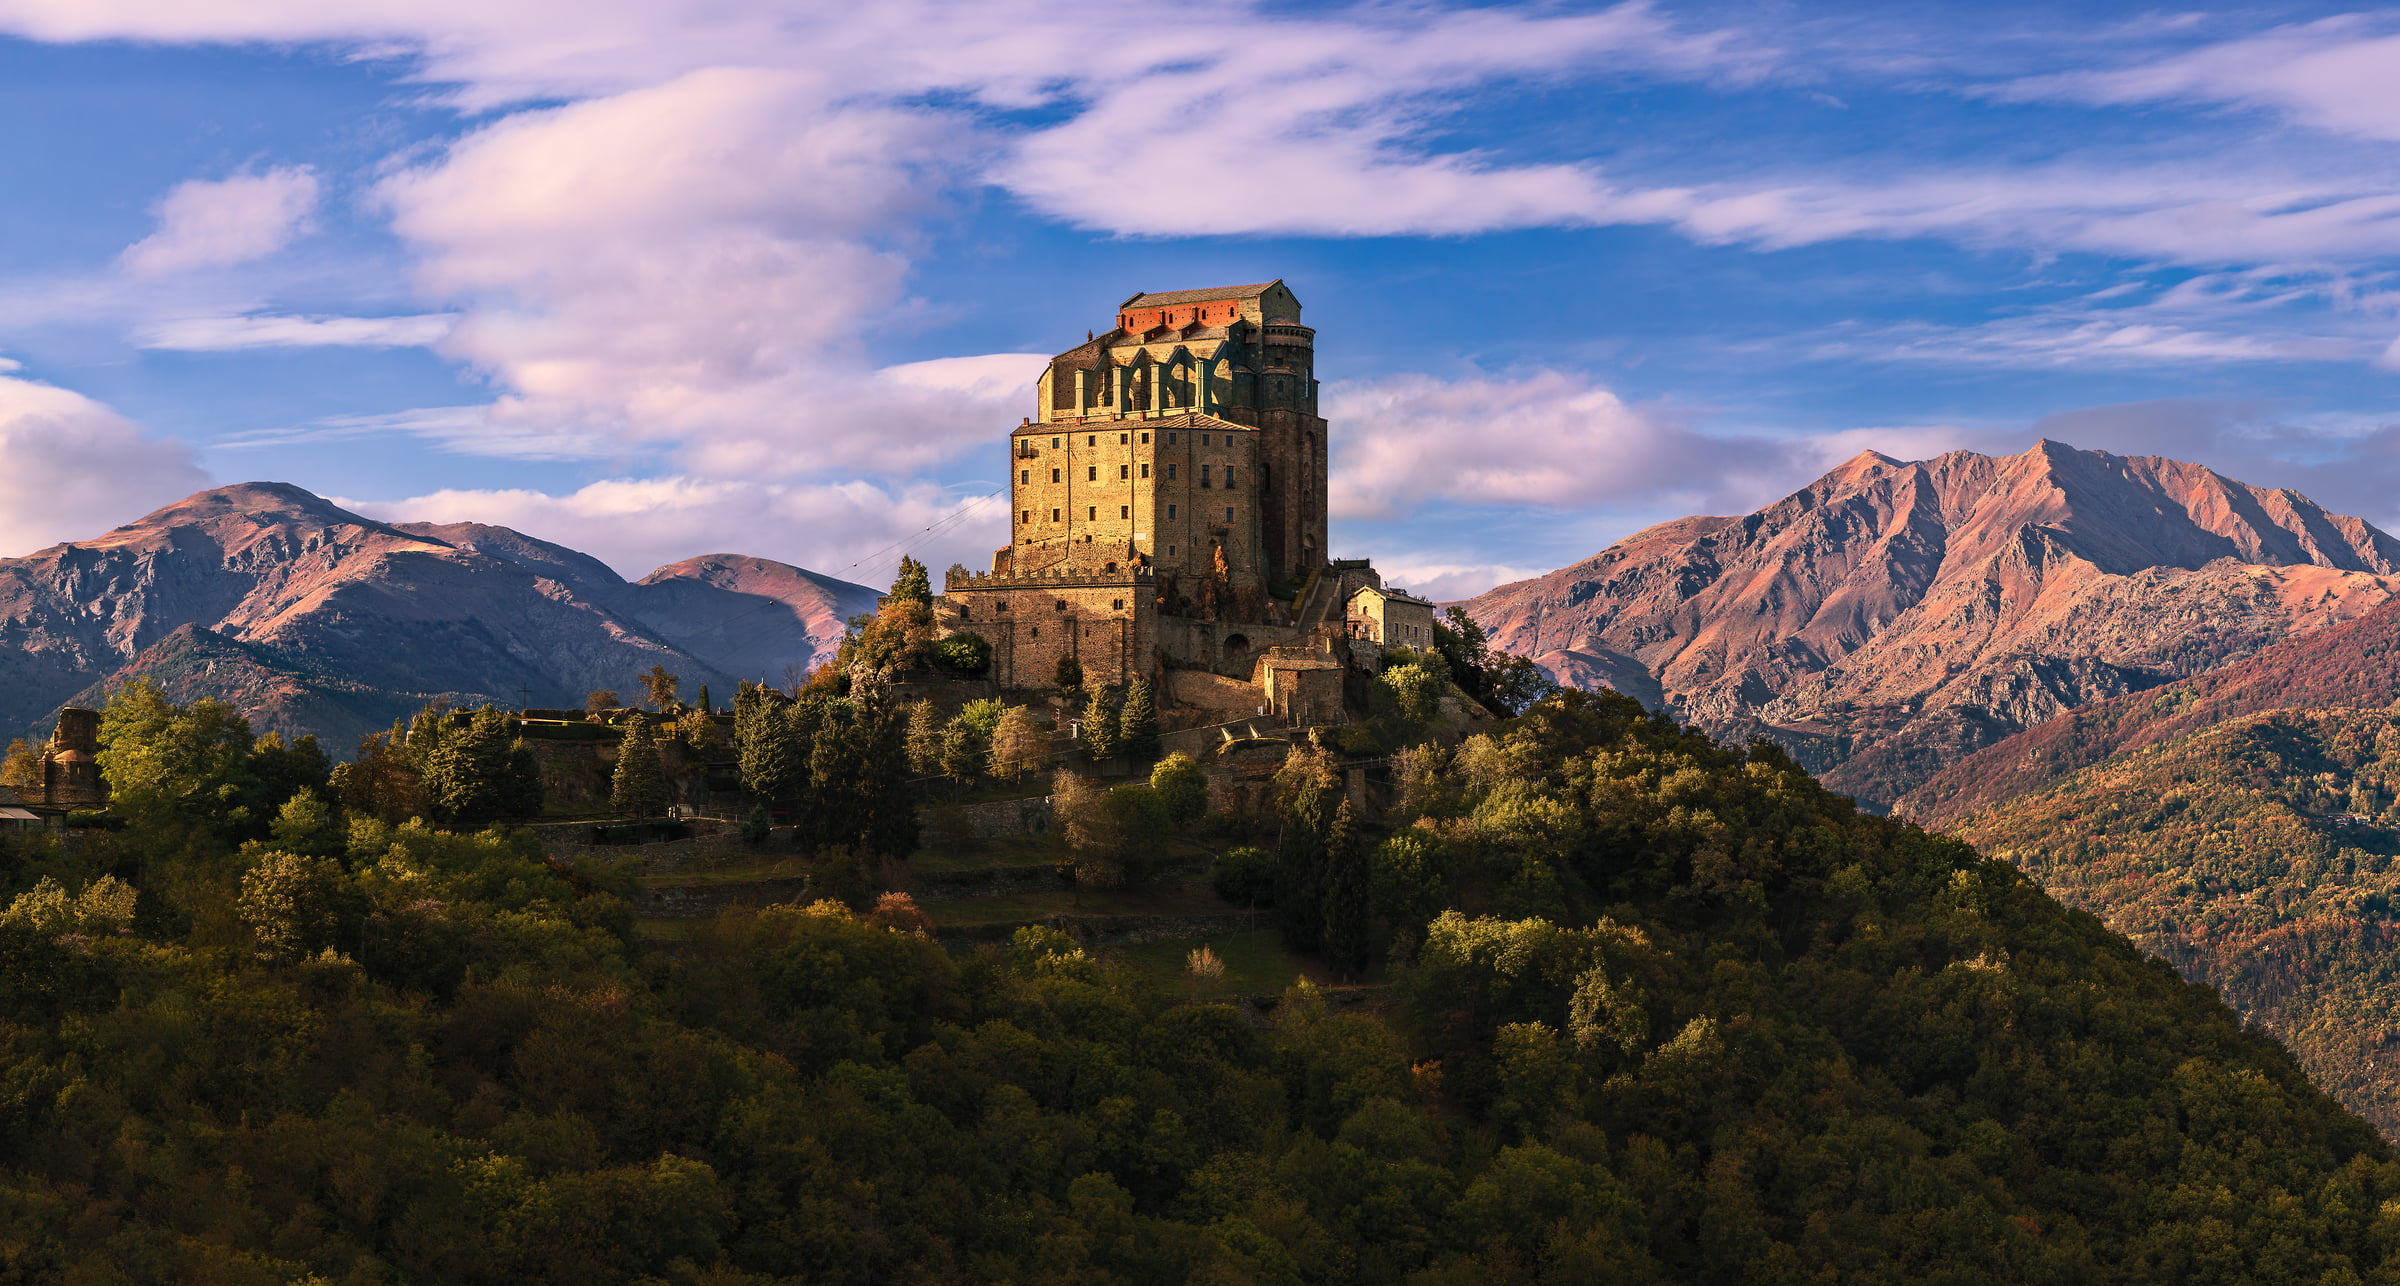 822 megapixels! A very high resolution, large-format VAST photo print of a magical landscape with a religious castle on a hill; photograph created by Duilio Fiorille of Sacra di San Michele in Sant'Ambrogio di Torino, Piedmont, italy